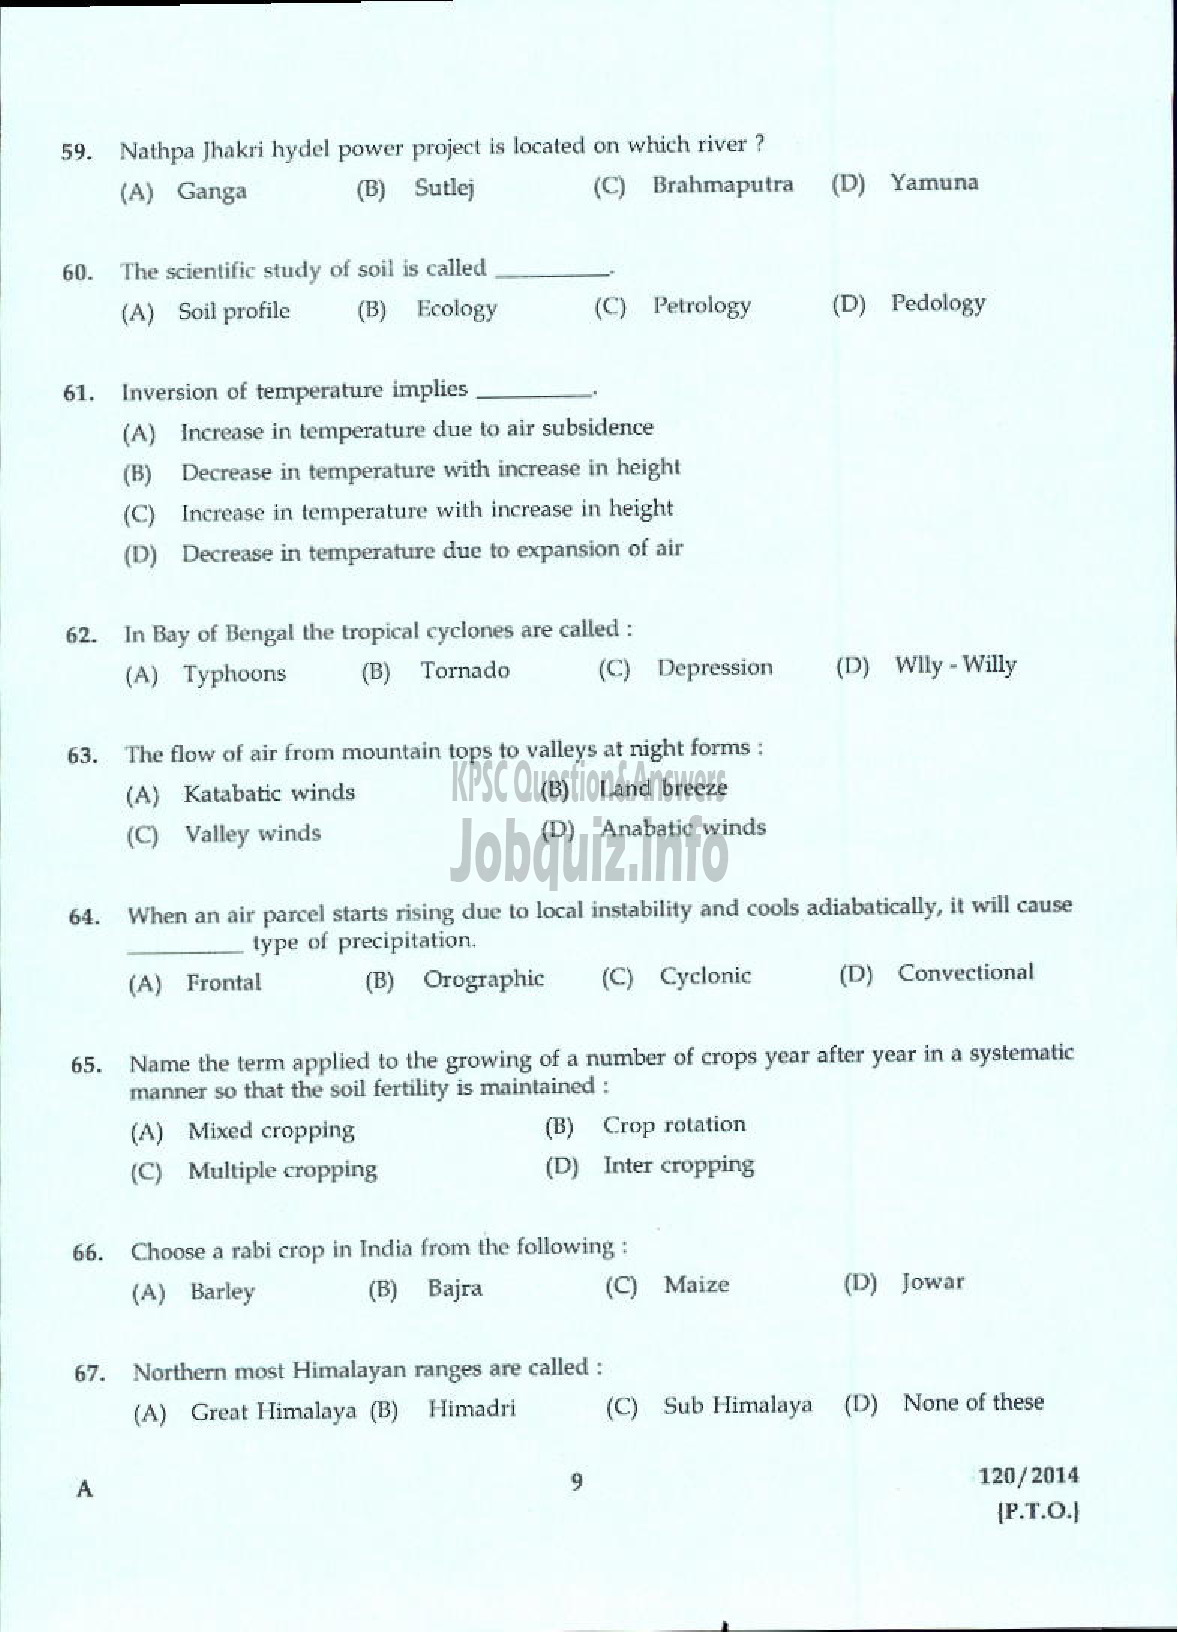 Kerala PSC Question Paper - LECTURER IN GEOGRAPHY KERALA COLLEGIATE EDUCATION-7